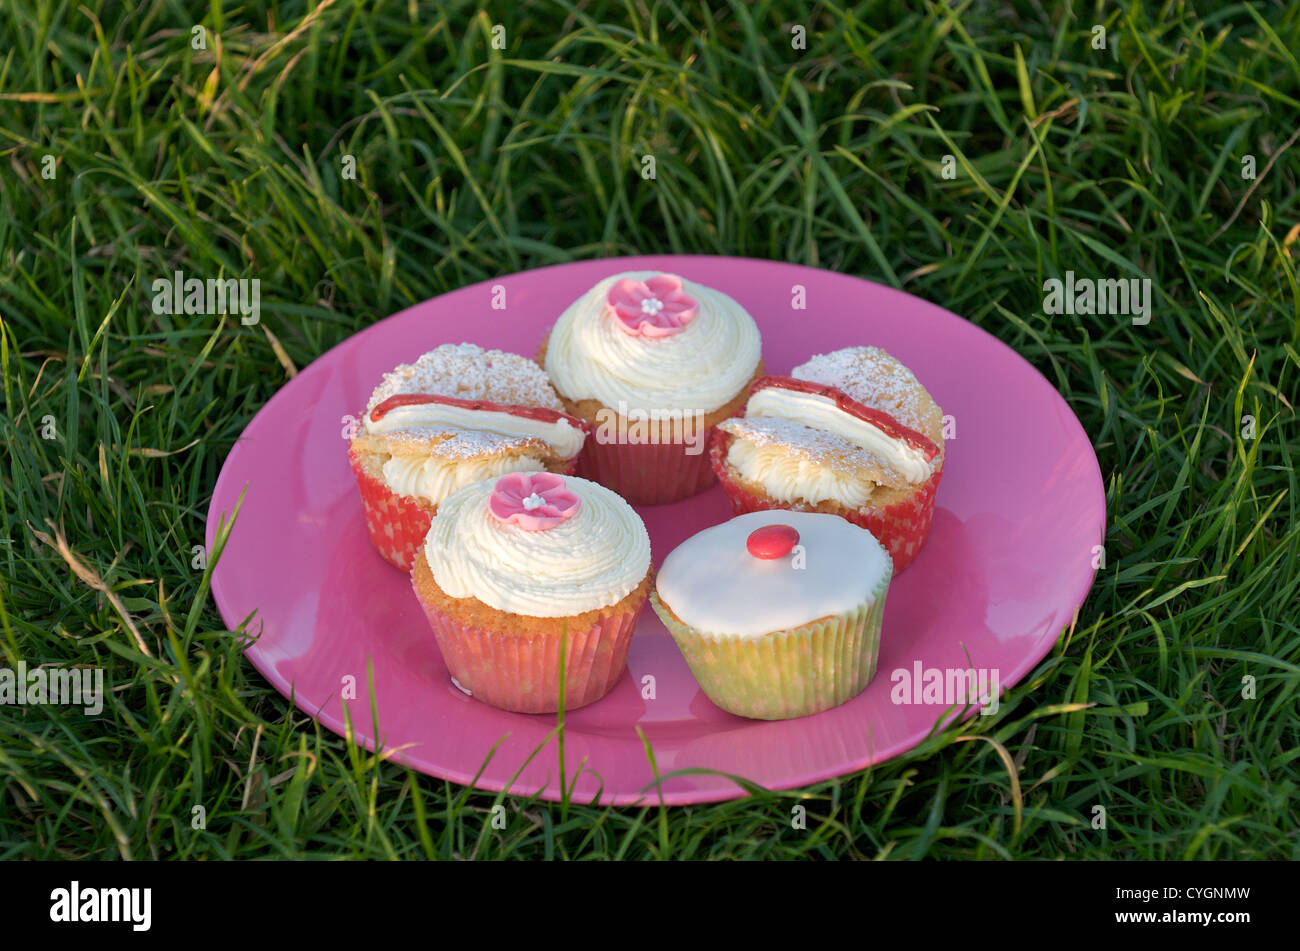 Plate of cupcakes Stock Photo